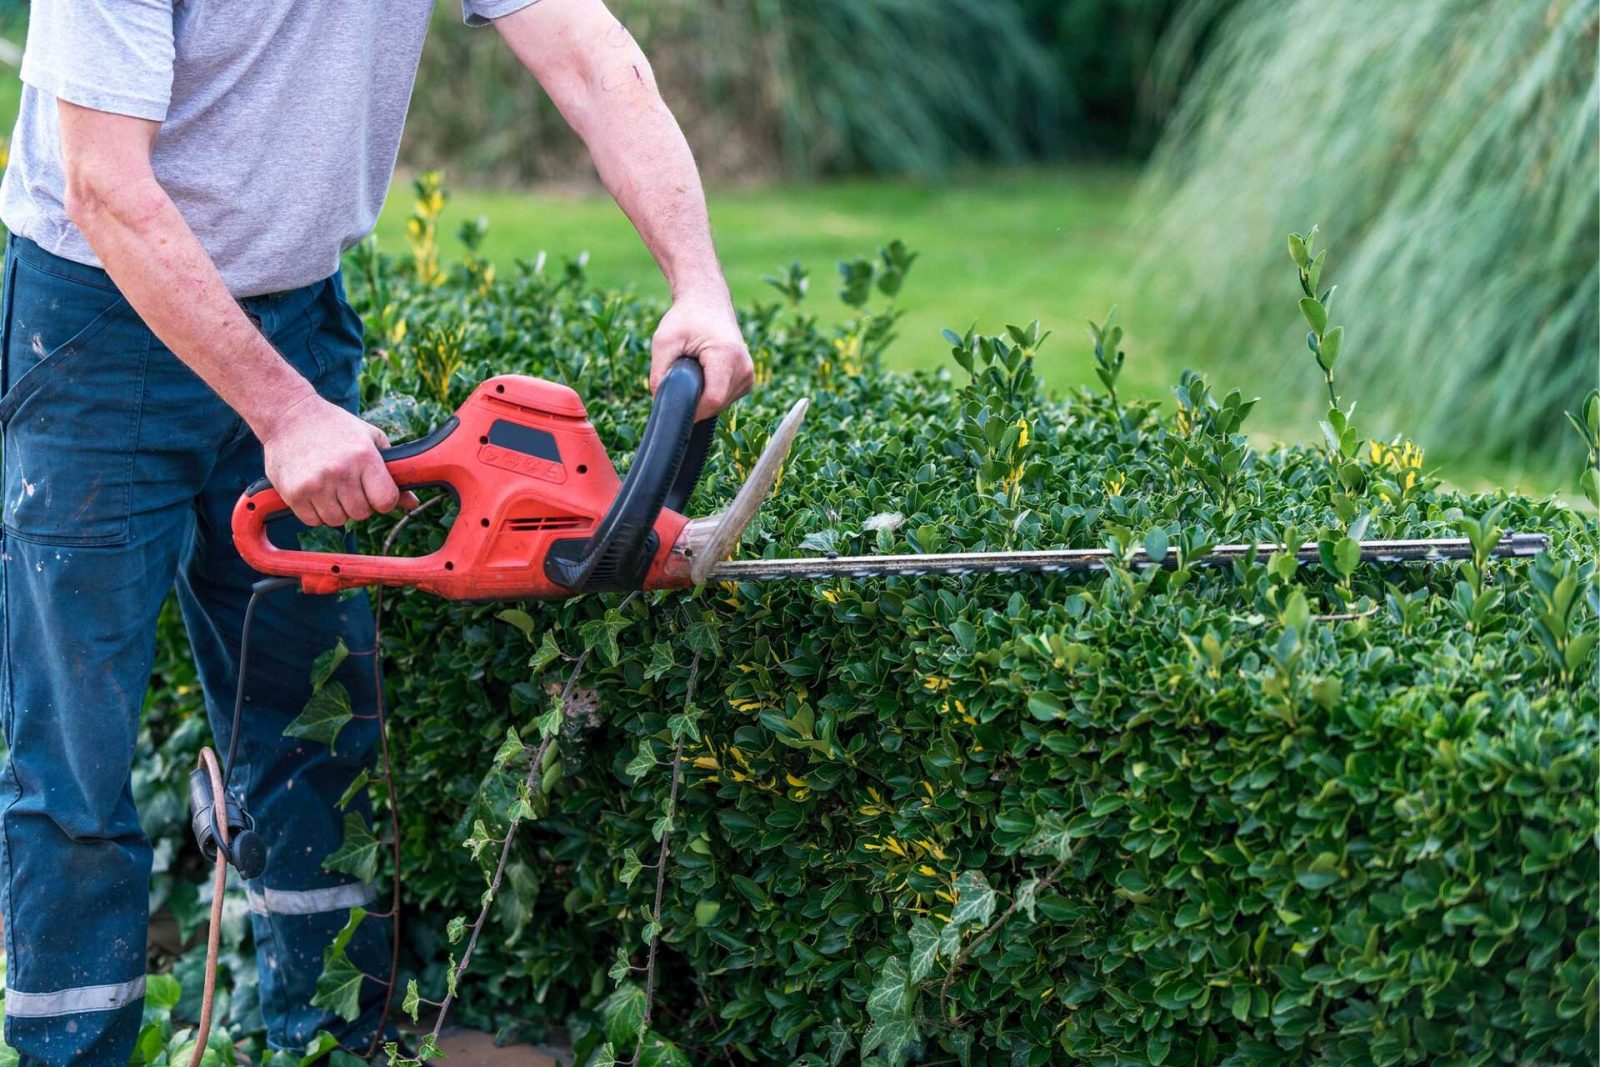 majestic tree care aims to keep trees healthy and strong with our pruning services